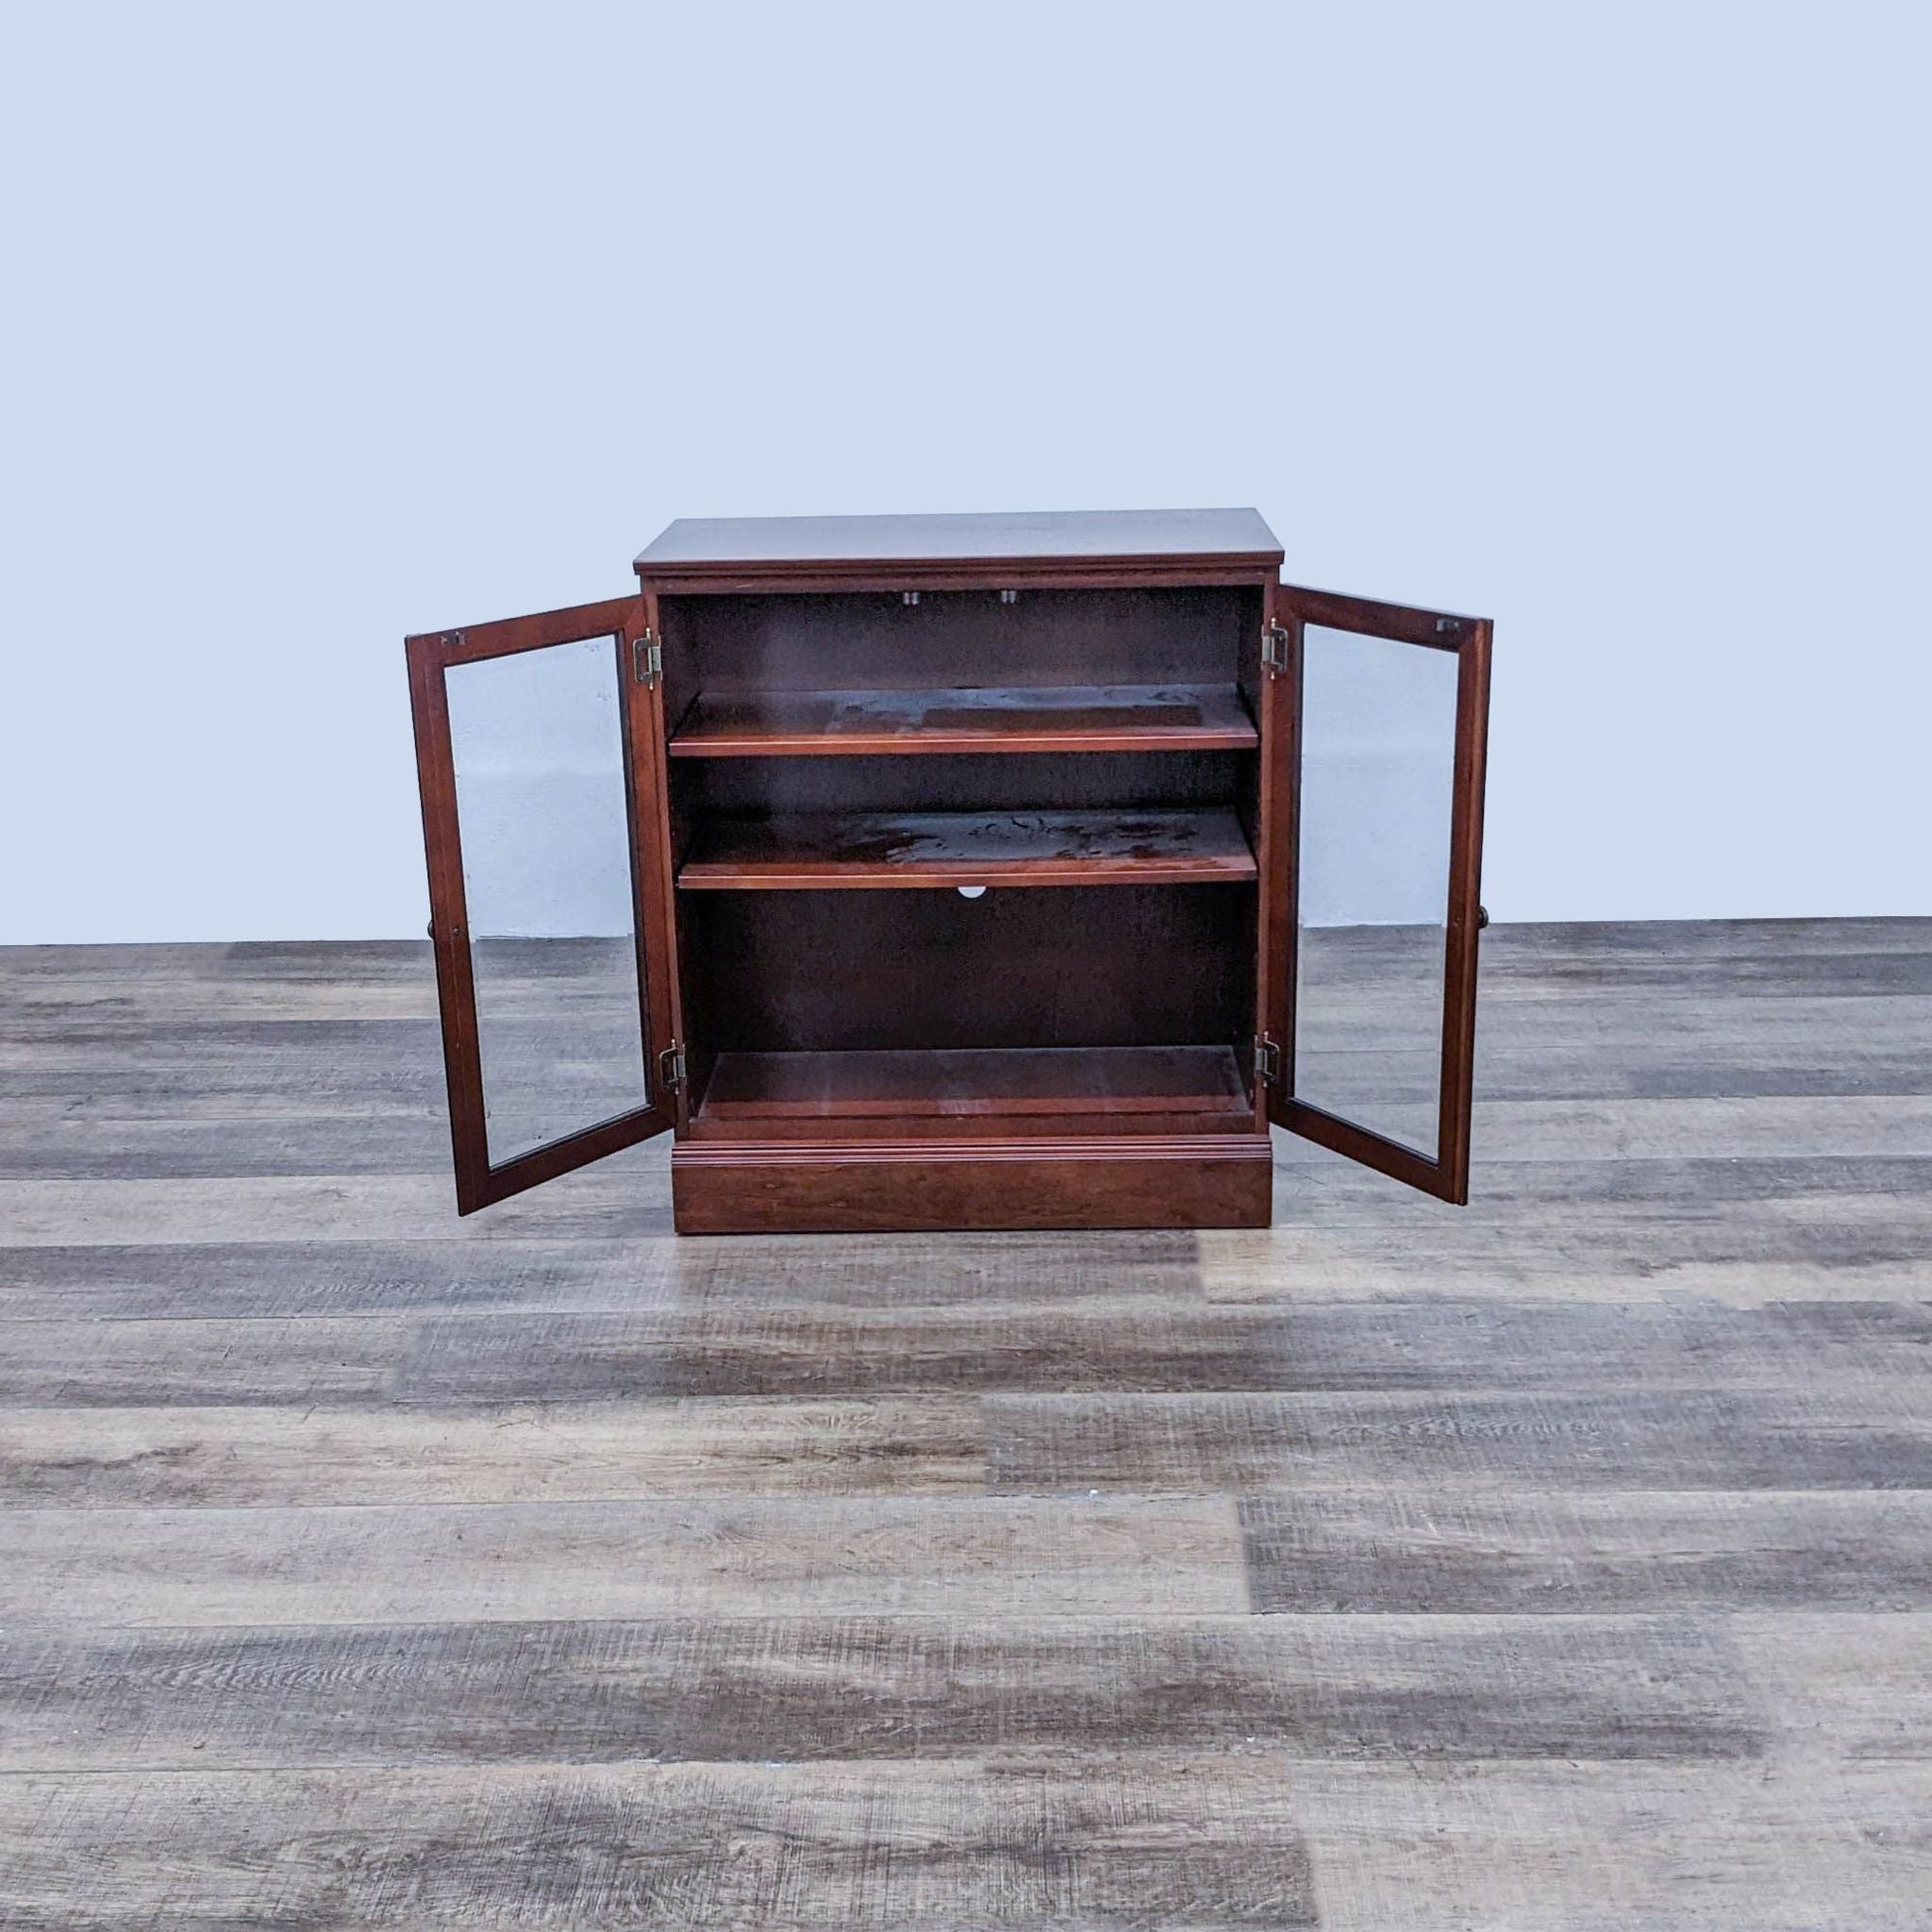 Bombay Company wooden bookcase open showing adjustable shelves, on a wood-patterned floor against a simple backdrop.